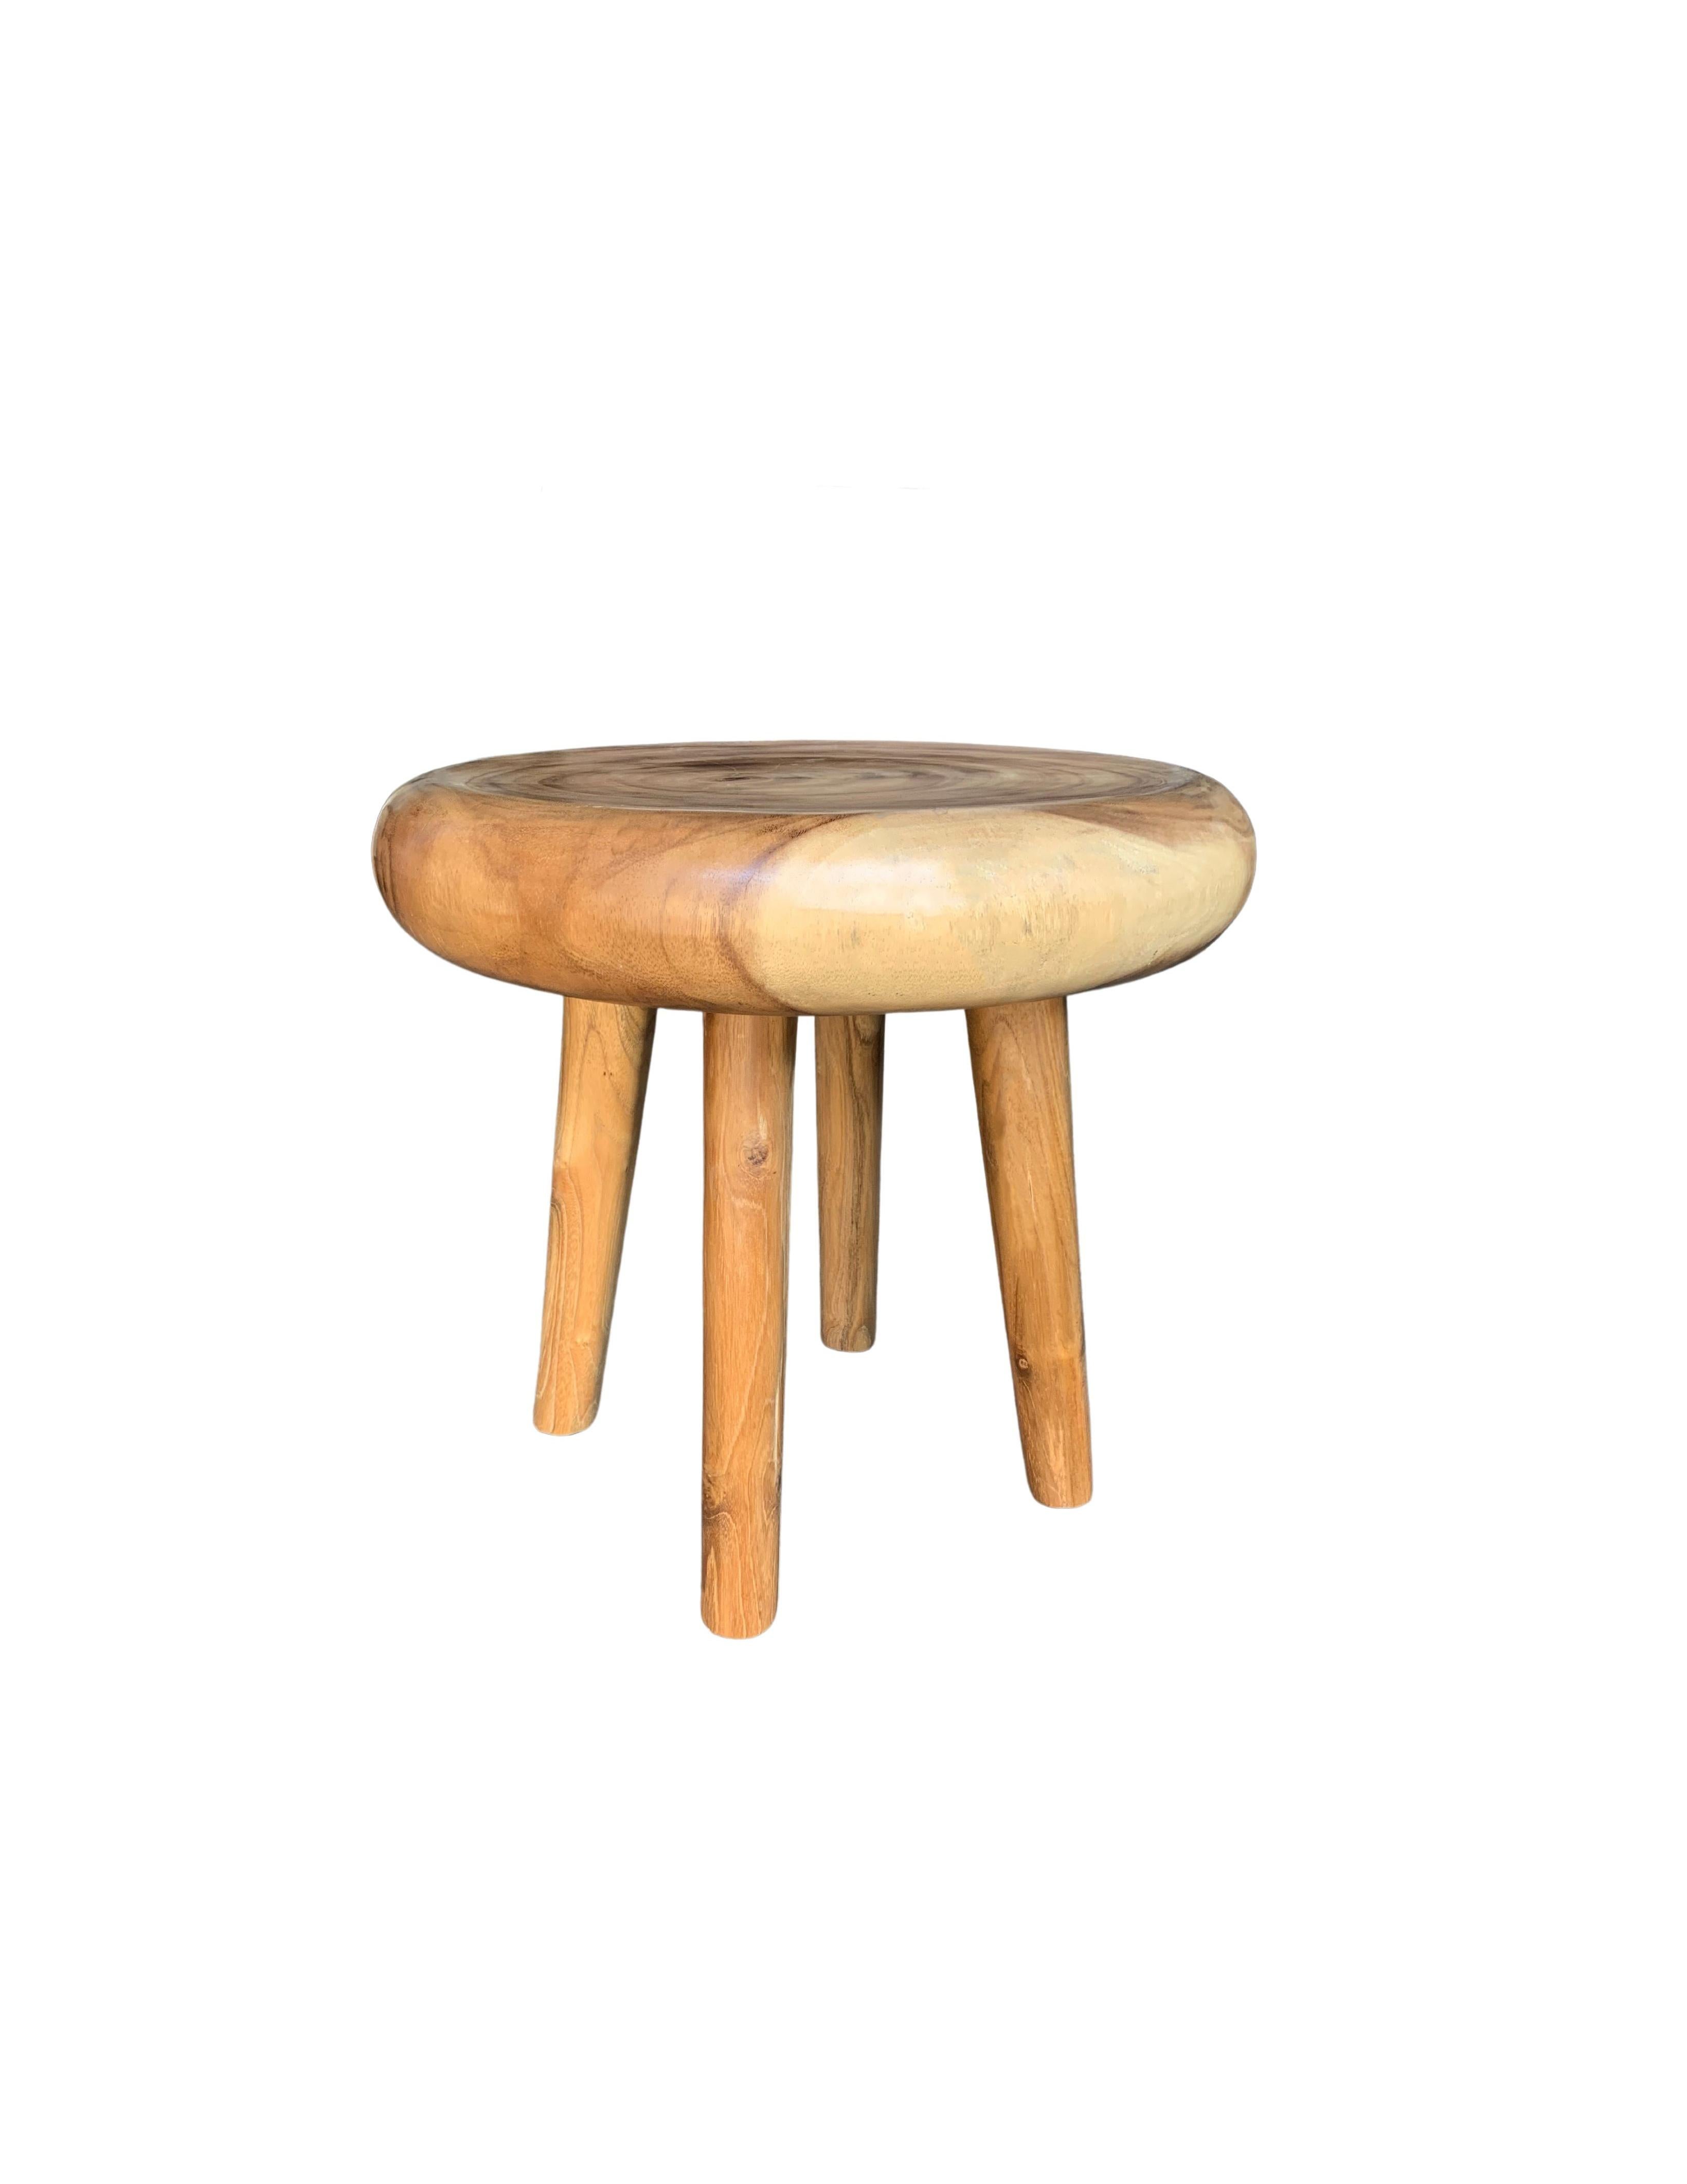 A wonderfully sculptural round side table with narrowly proportioned legs. Its neutral pigment and subtle wood texture makes it perfect for any space. A uniquely sculptural and versatile piece certain to invoke conversation. This table was crafted